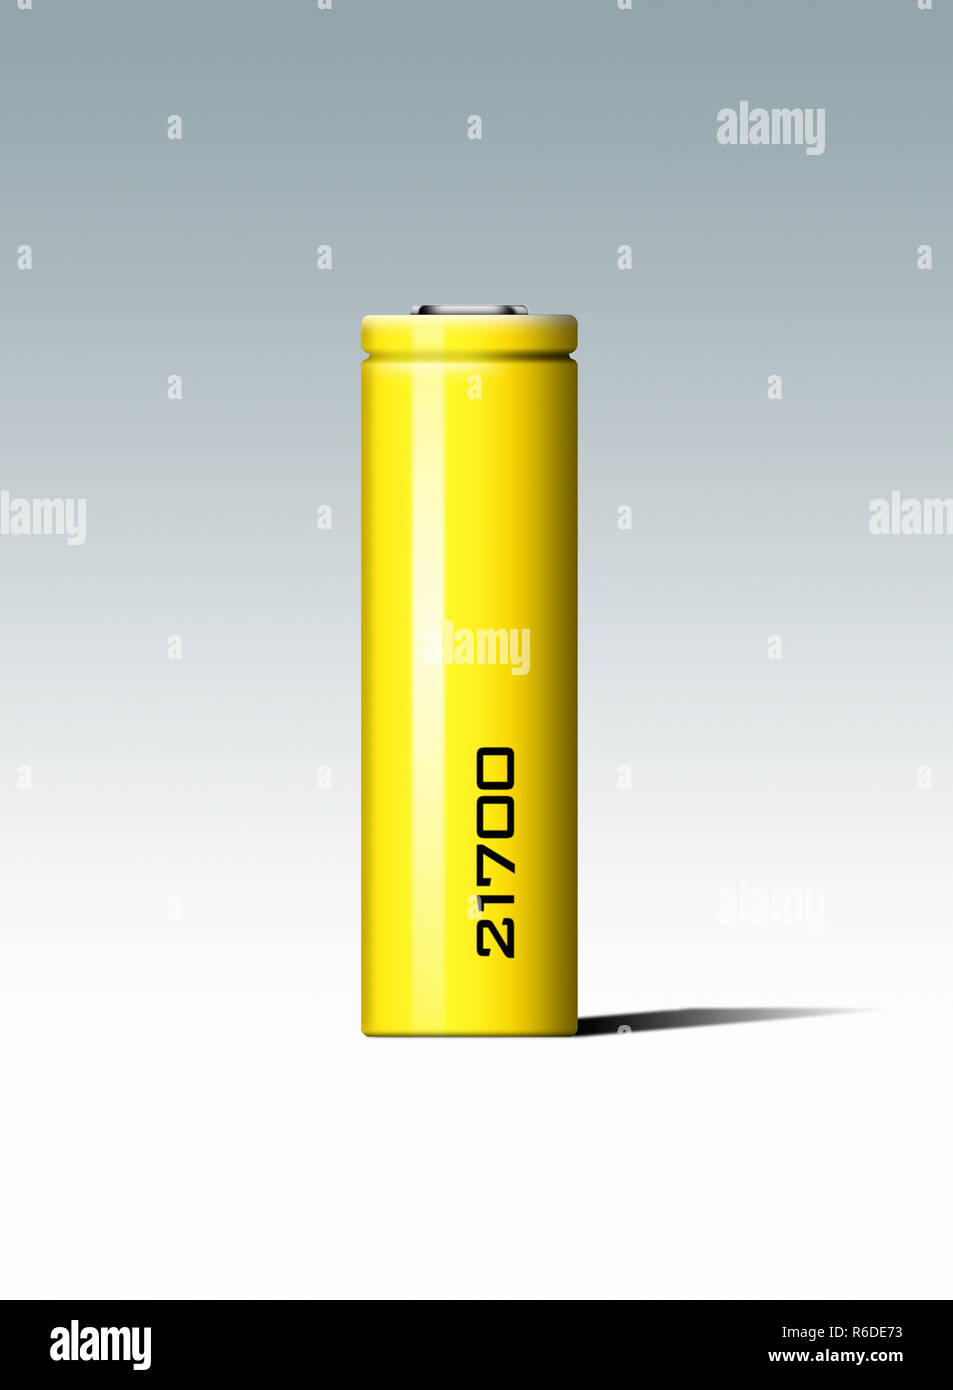 Yellow lithium style battery against a white background Stock Photo